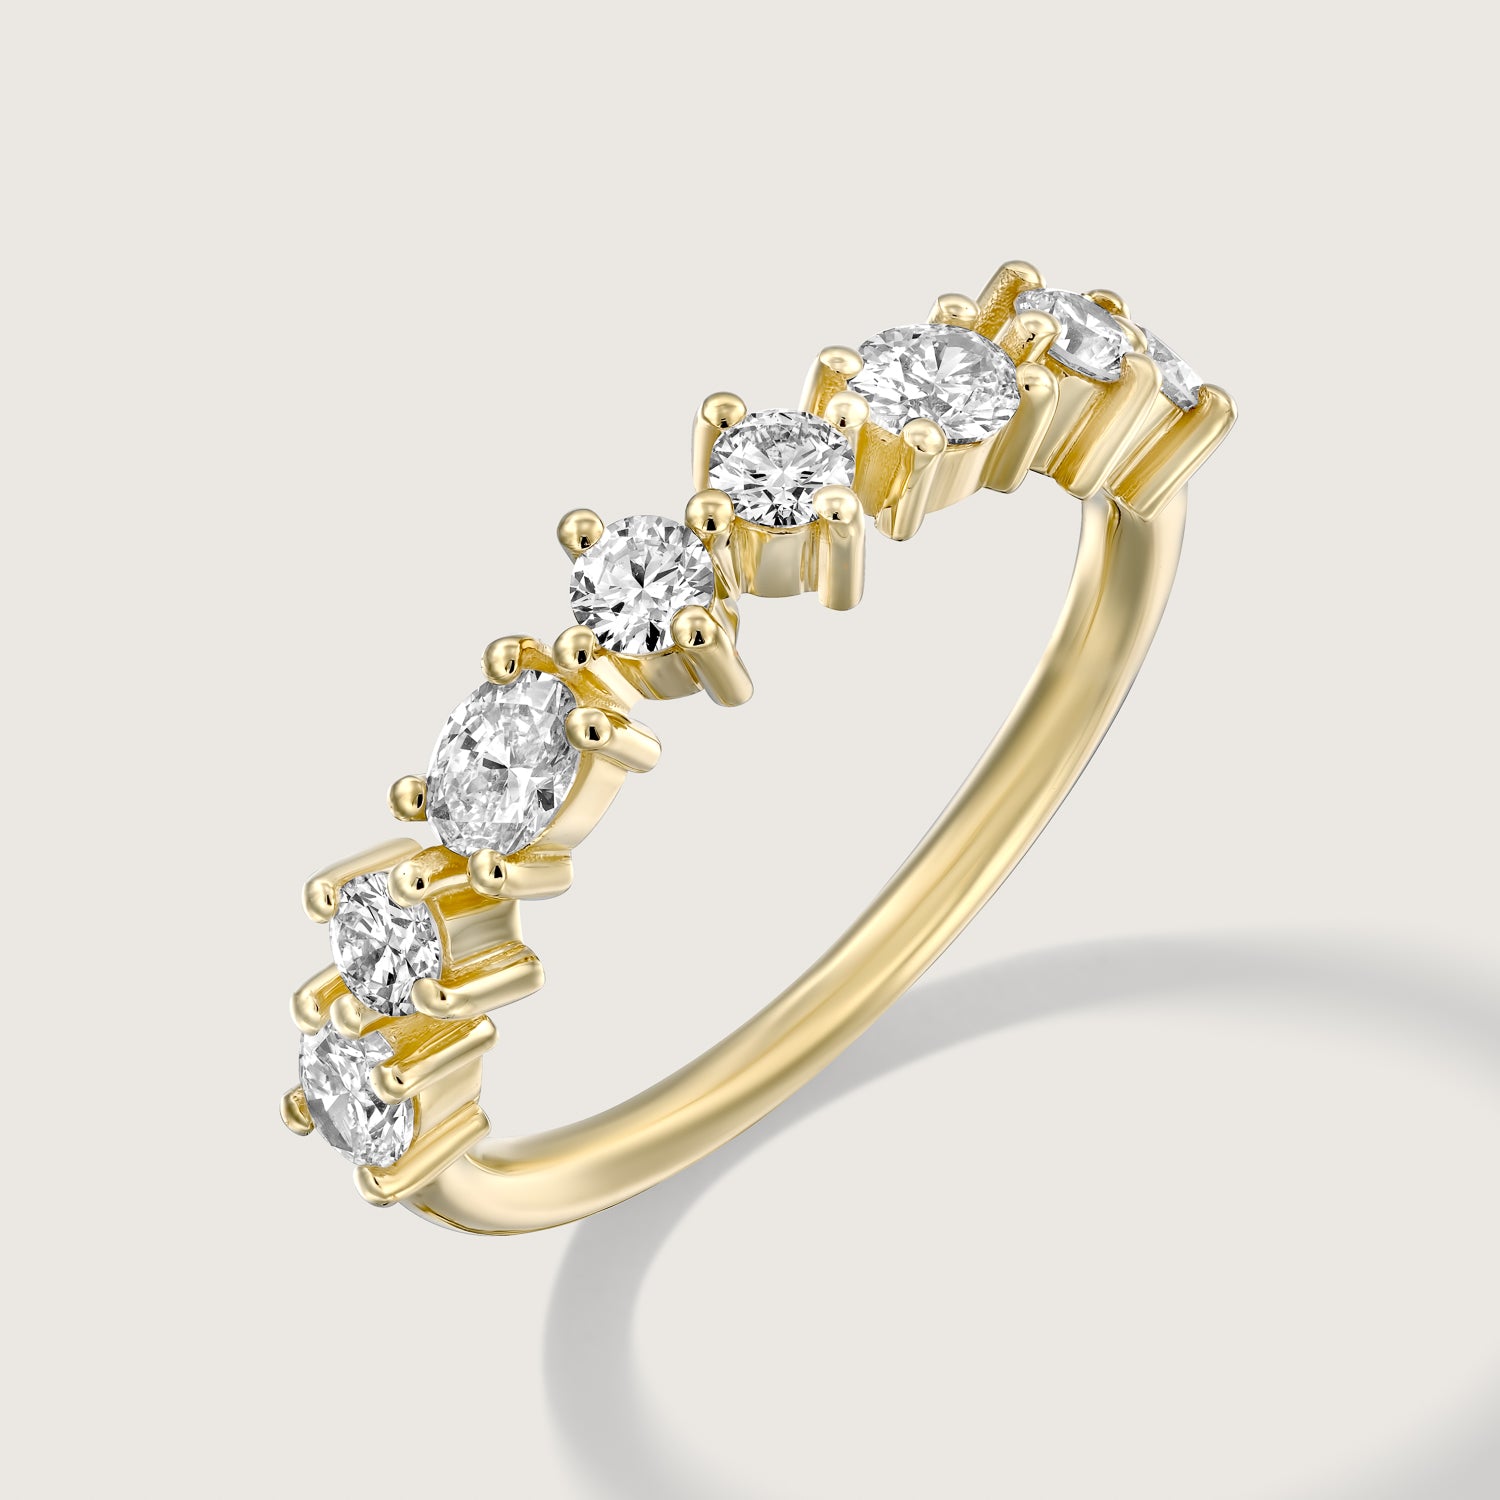 Queen E Gold Ring with White Diamonds